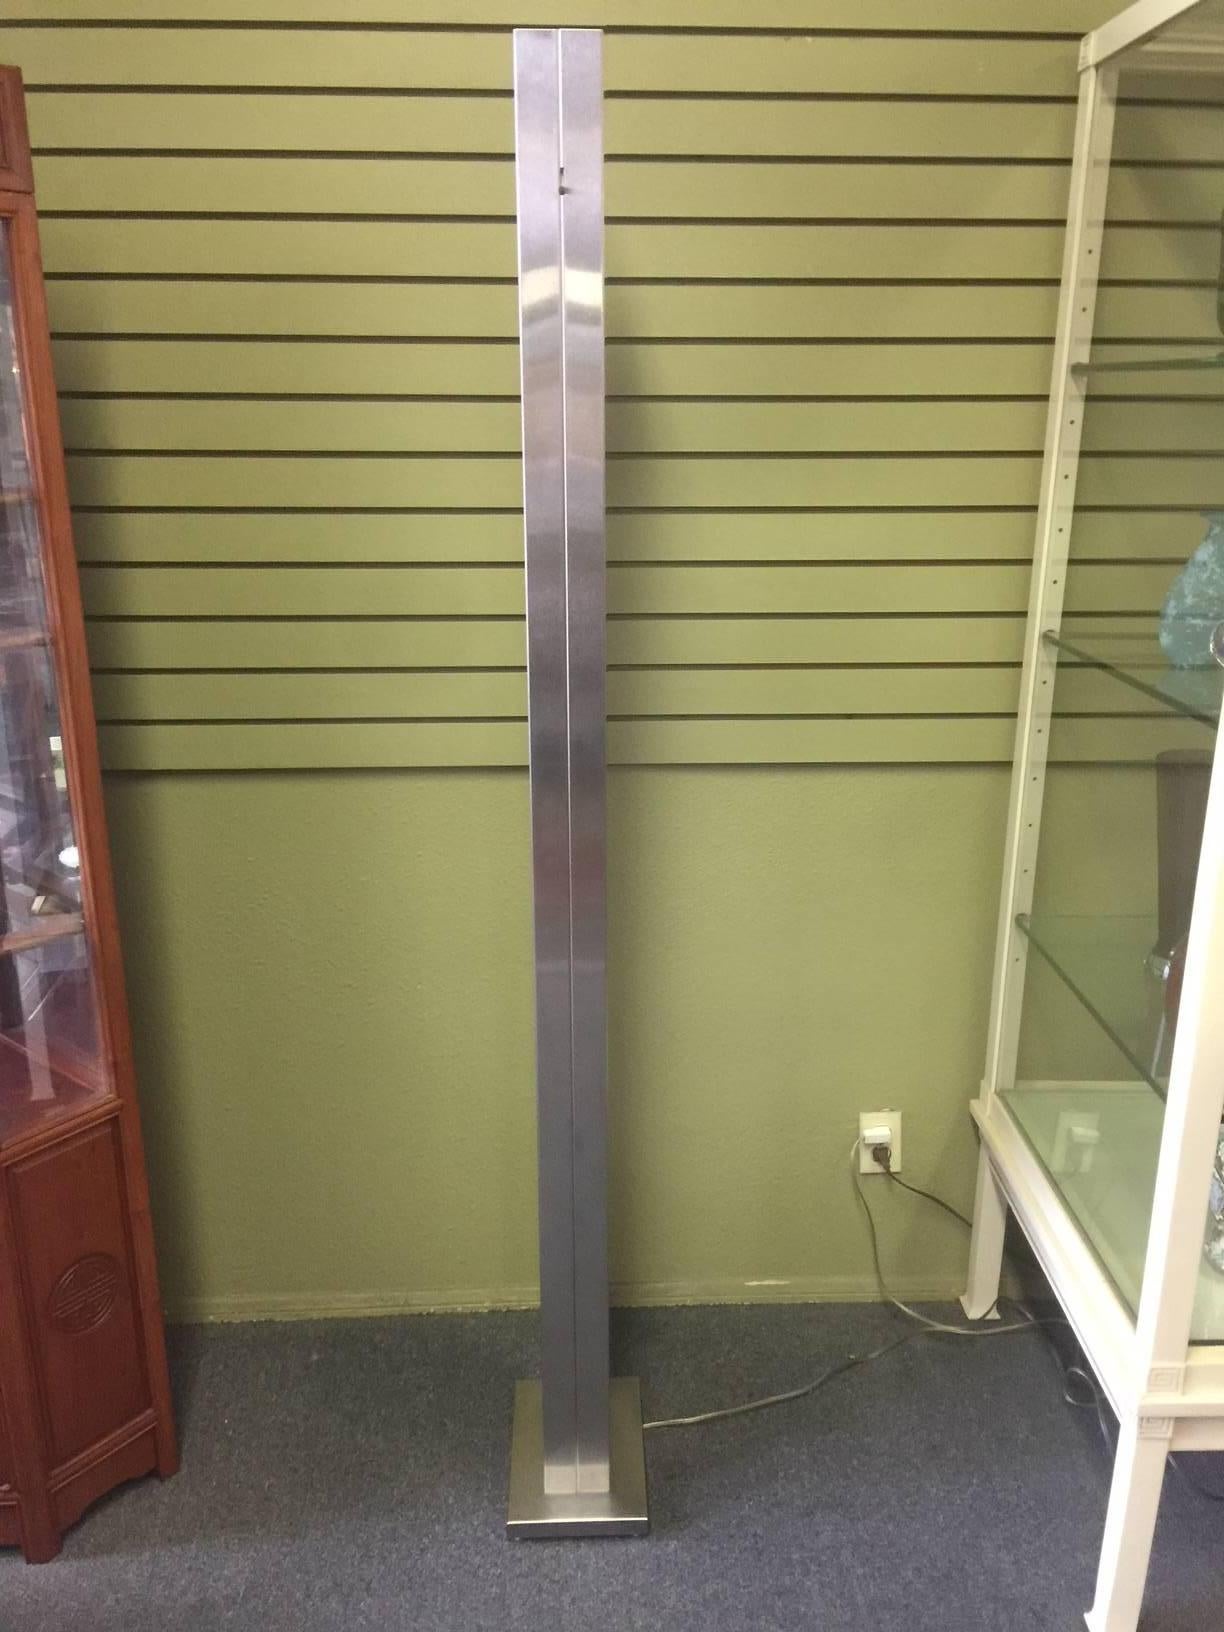 Massive, heavy and solid stainless steel torchiere floor lamp by Casella Lighting of San Francisco, circa 1970's. The piece has a brushed steel finish with a dimmer switch in excellent working condition. Great addition to any room!